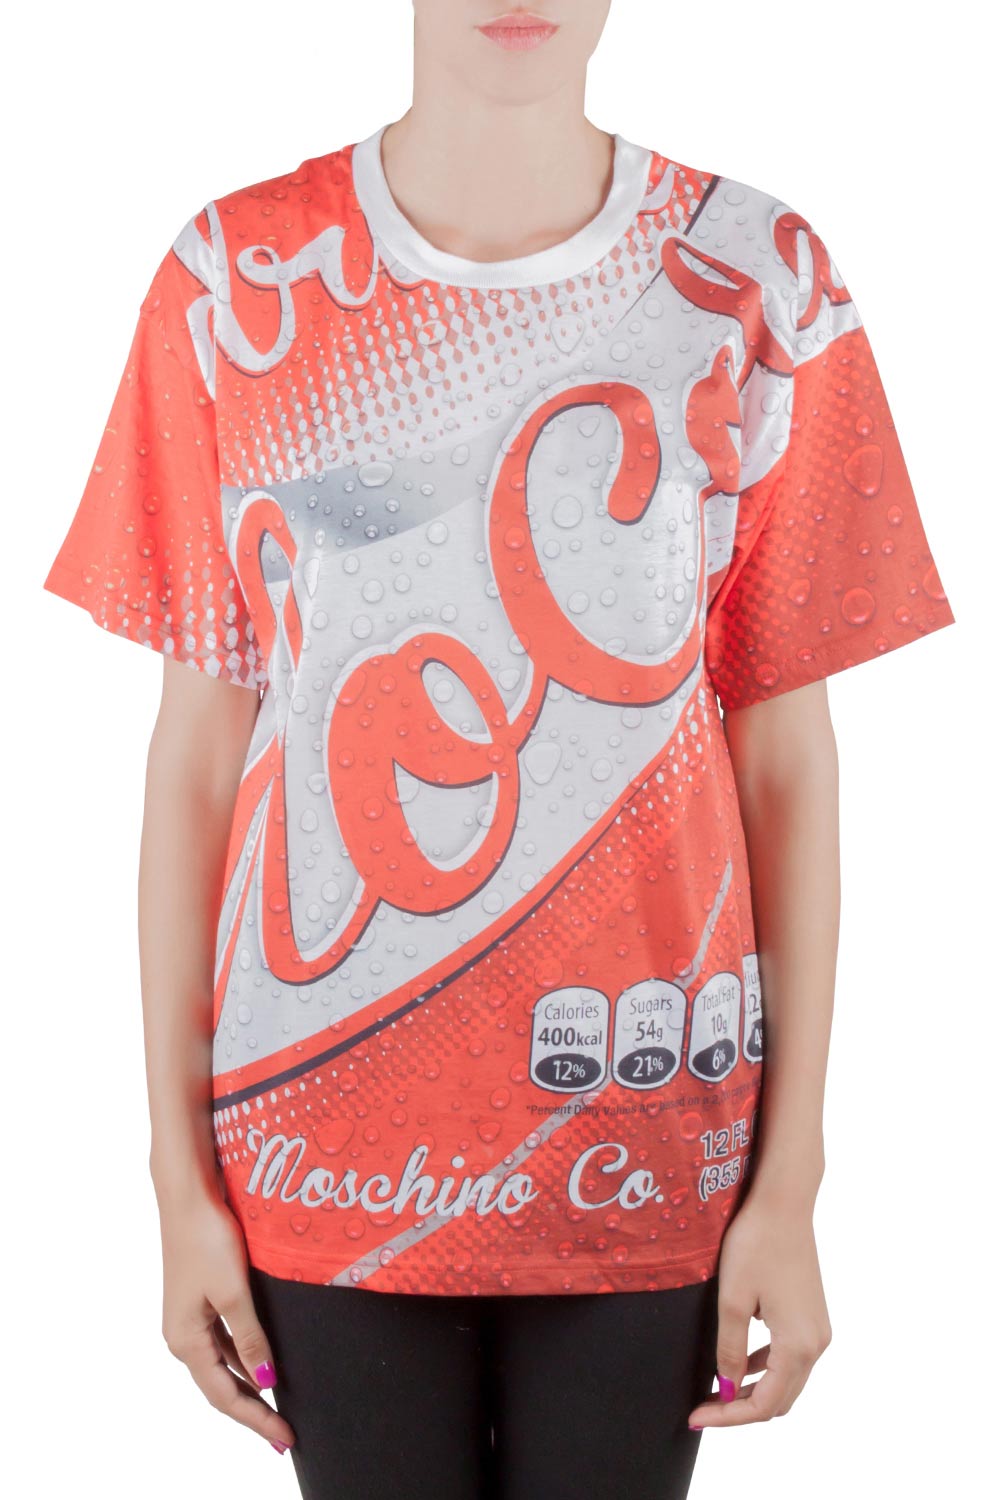 

Moschino Couture Red Soda Can Printed Cotton Oversized T Shirt XS